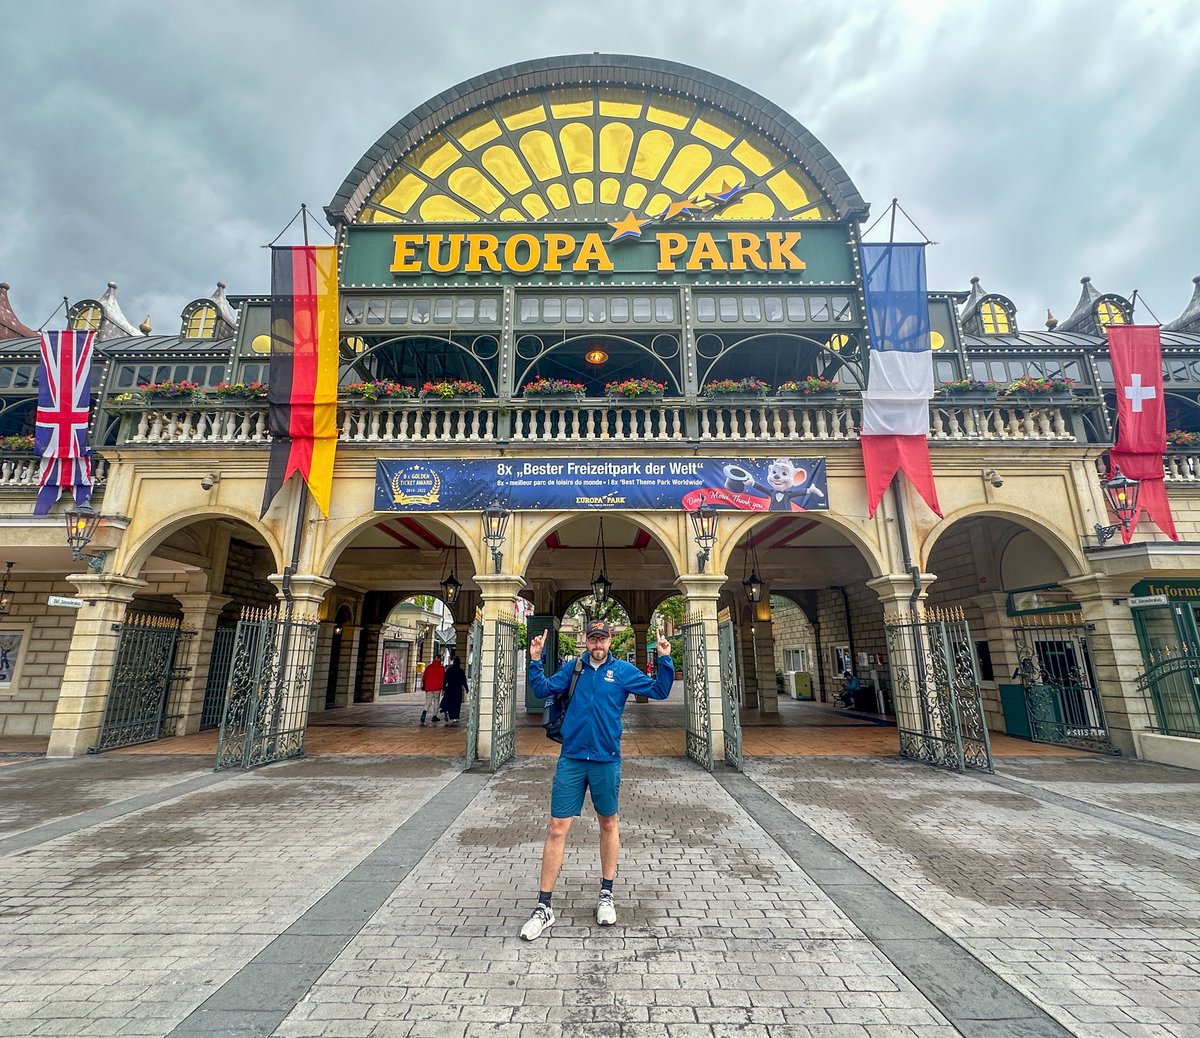 A brilliant first day at @EuropaParkUK 

Voltron was the most intense ride I’ve ever been on, It was relentless! 🥴

I also loved Wodan Timbur Coaster and Blue Fire.

Back again tomorrow! 🎢